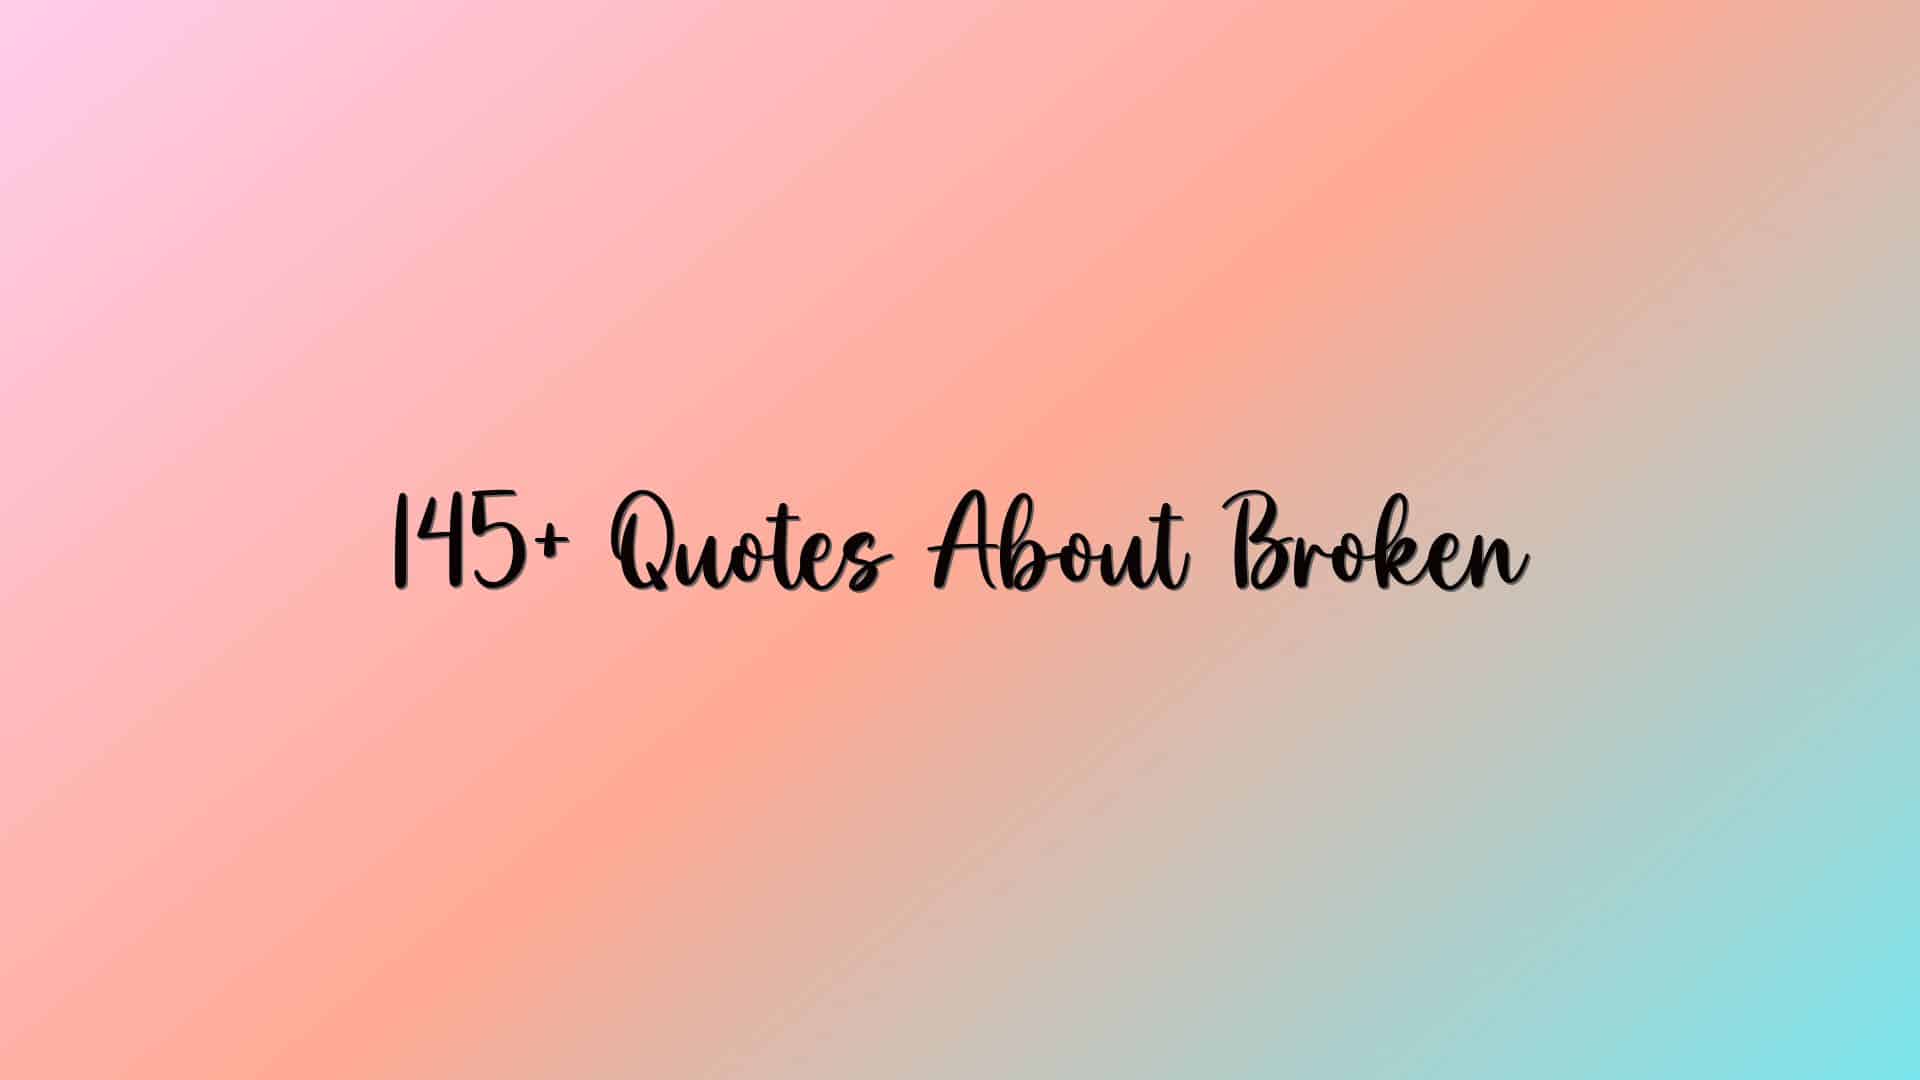 145+ Quotes About Broken